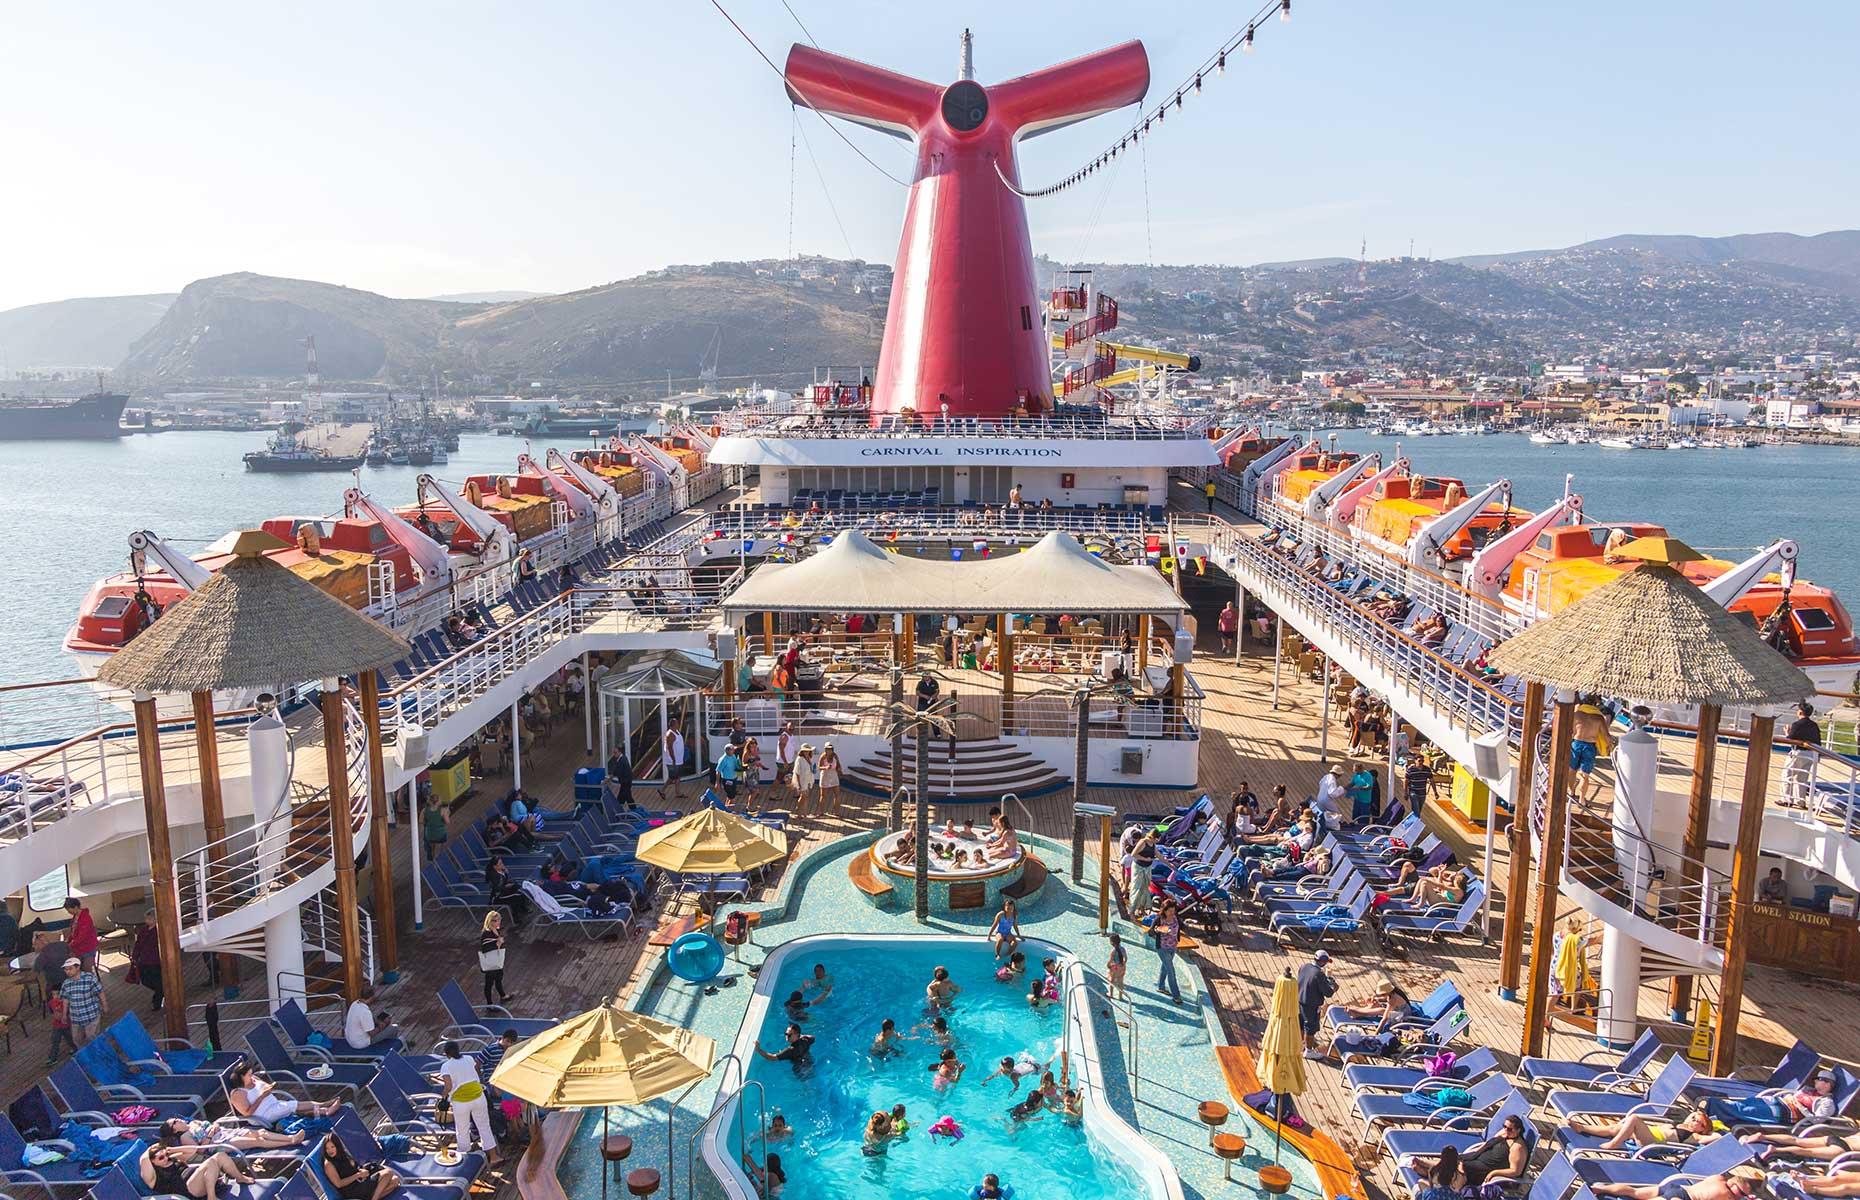 Sadly, the once buzzing pool and decks fell silent during Carnival's restructuring during COVID. The ship was beached in Turkey in August 2020 with scrapping taking place in April 2021.